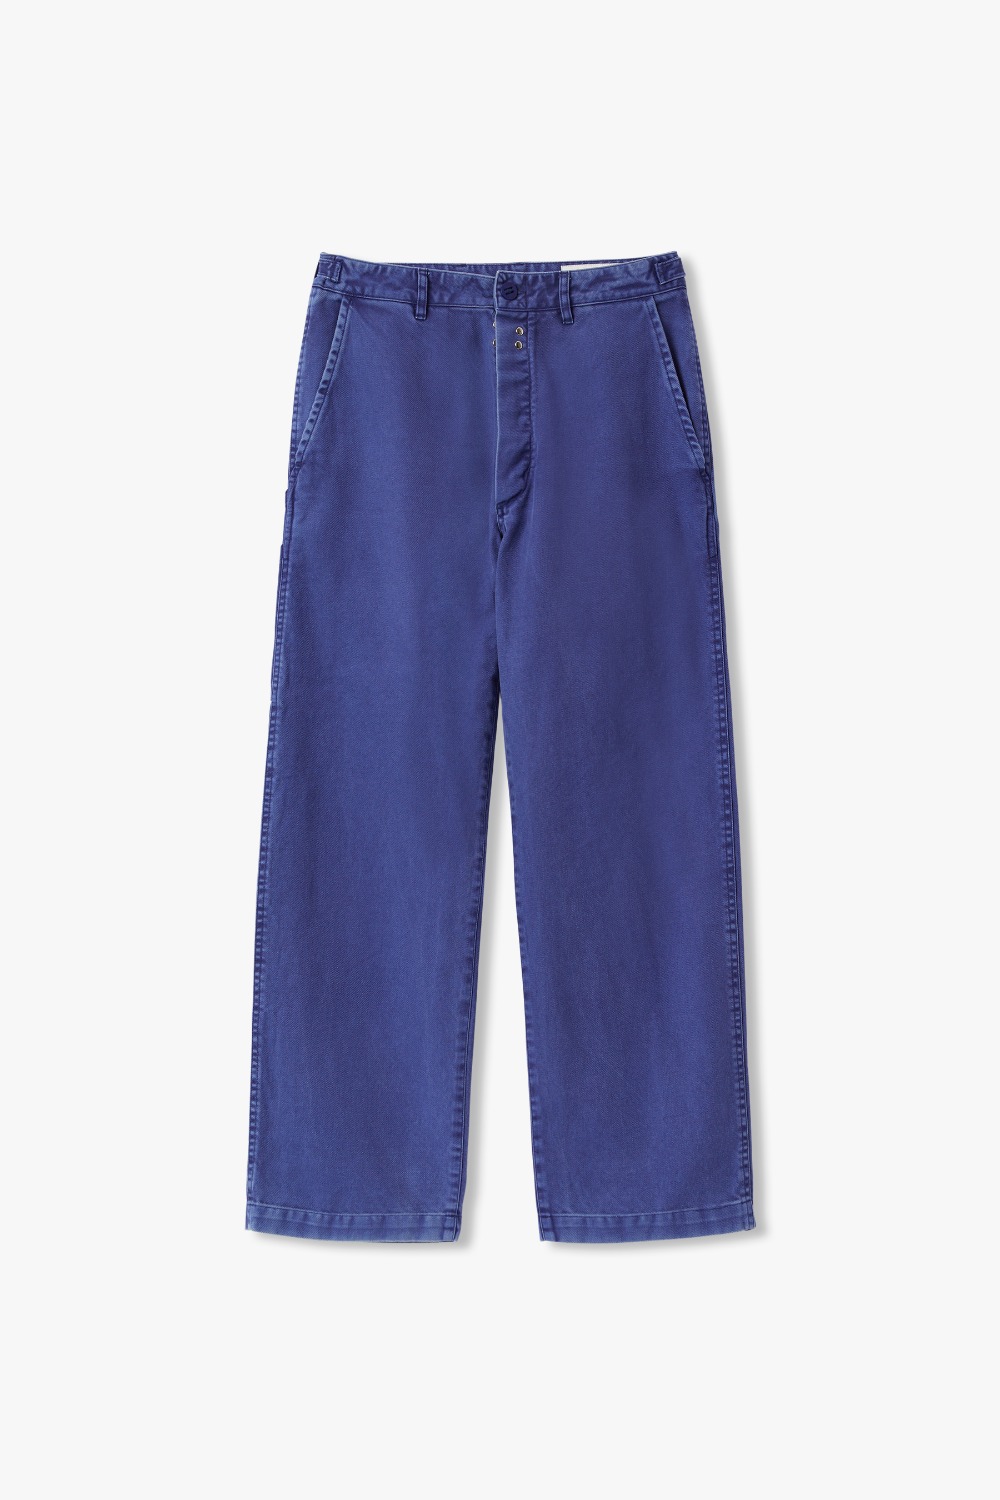 FRENCH BLUE YRS Y-964 ORIGINAL SERGE COTTON WASHED FRENCH WORK PANTS (ECP GARMENT PROCESS)